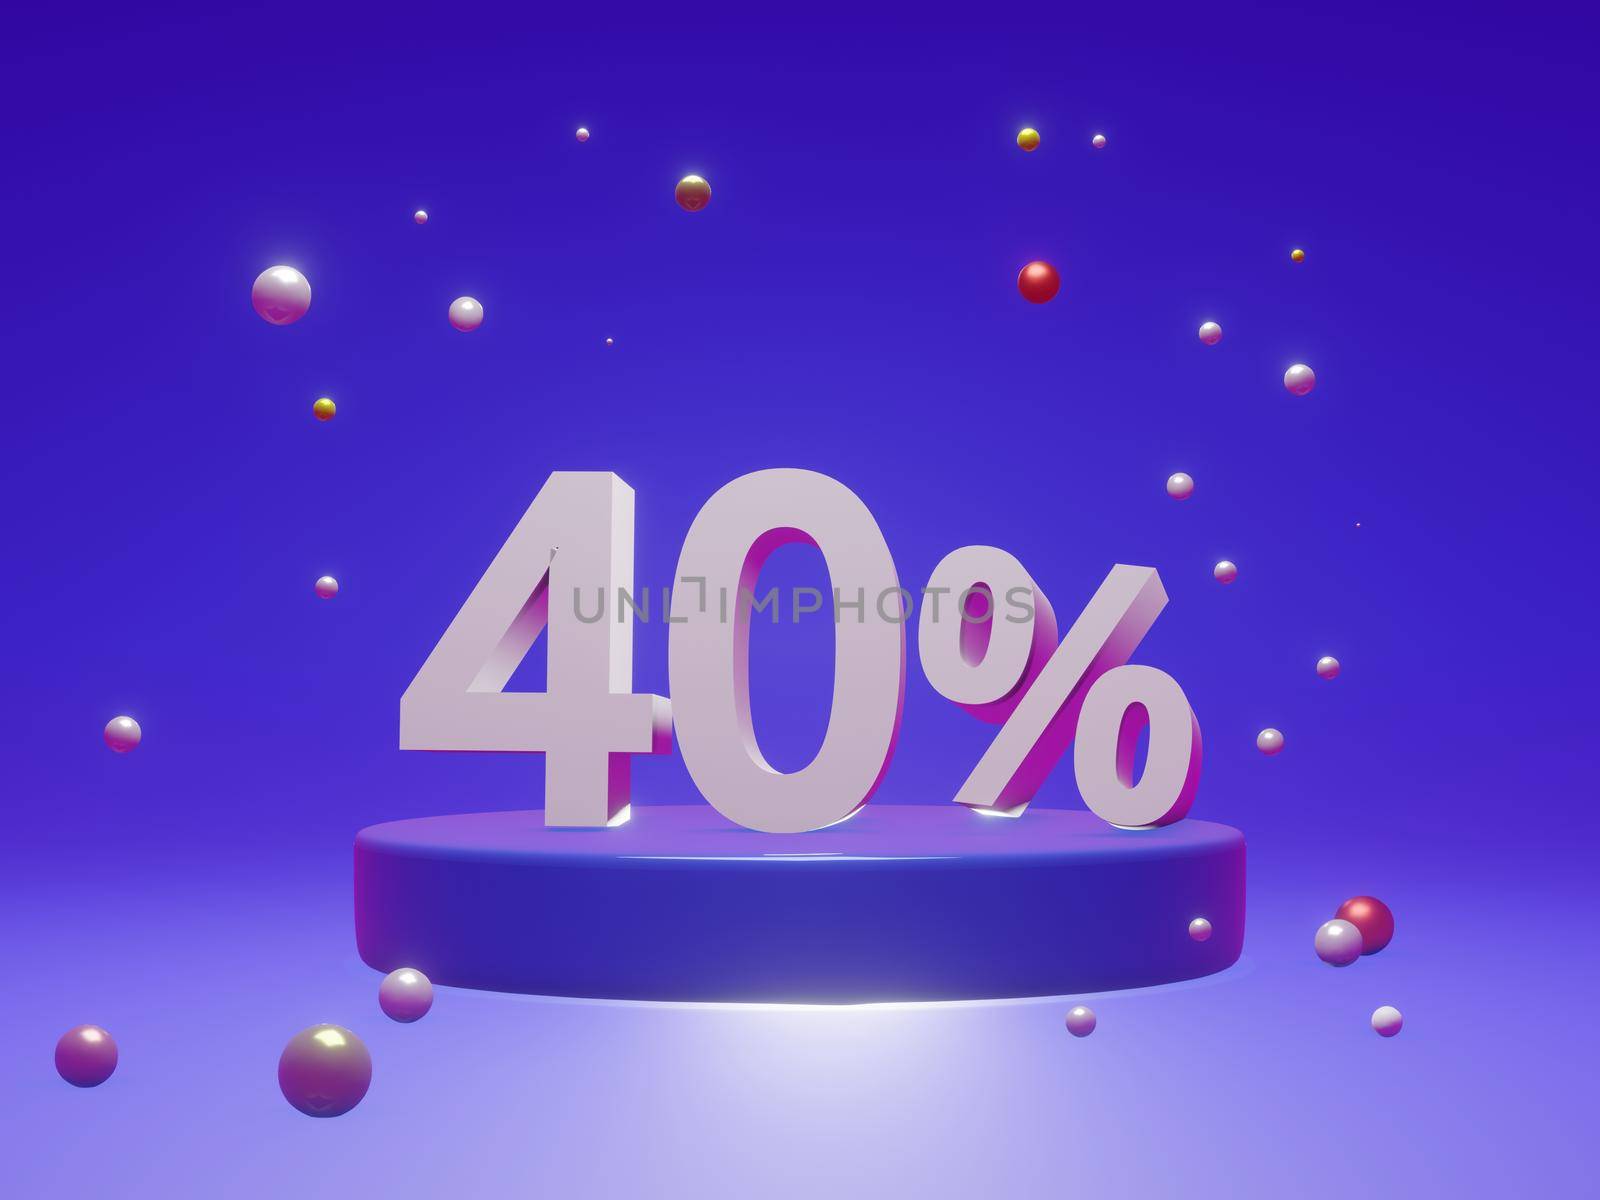 The podium shows up to 40% off discount concept banners, promotional sales, and super shopping offer banners. 3D rendering. by noppha80